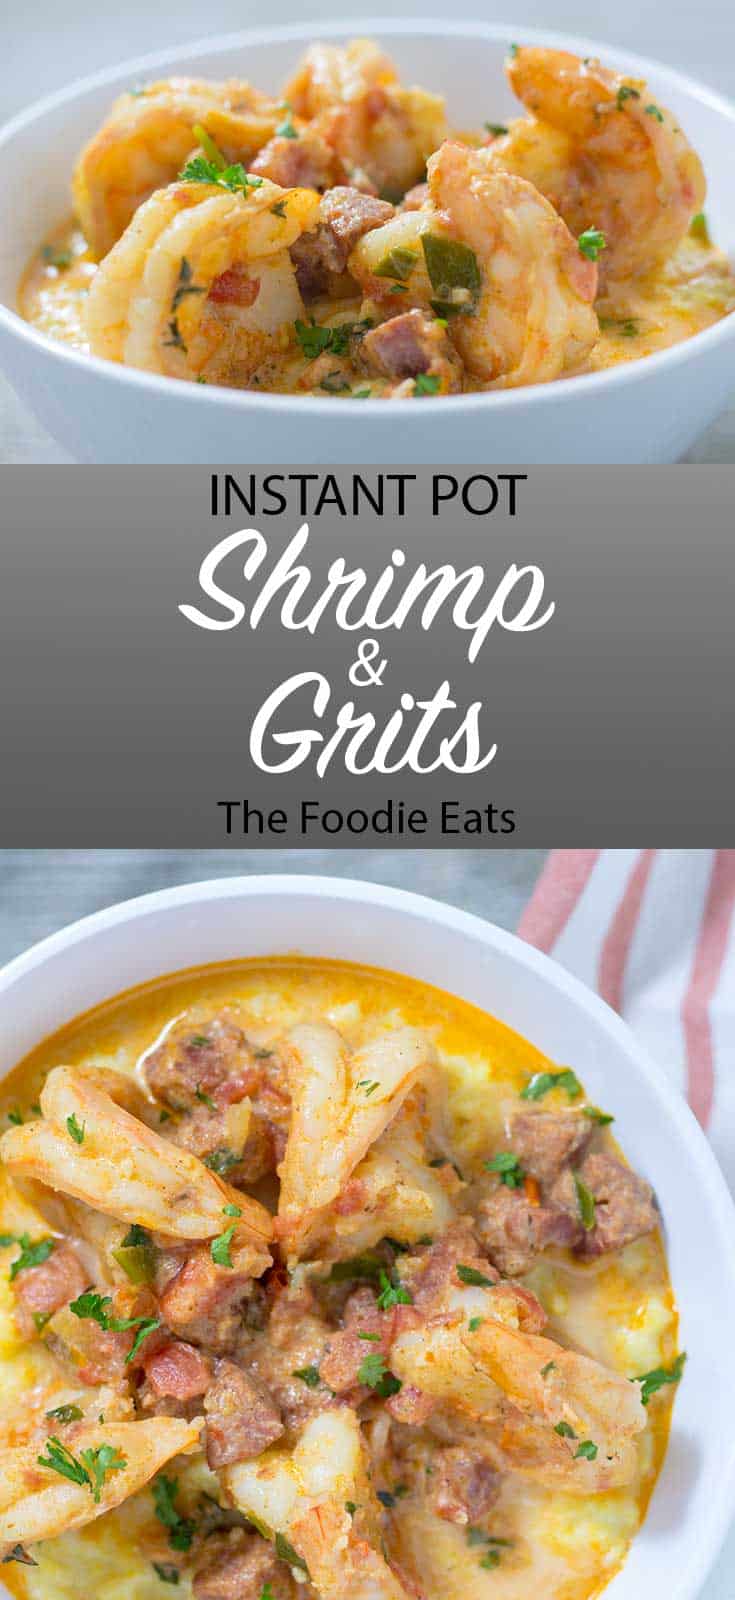 Instant Pot Shrimp and Grits - Cajun & Southern | The Foodie Eats